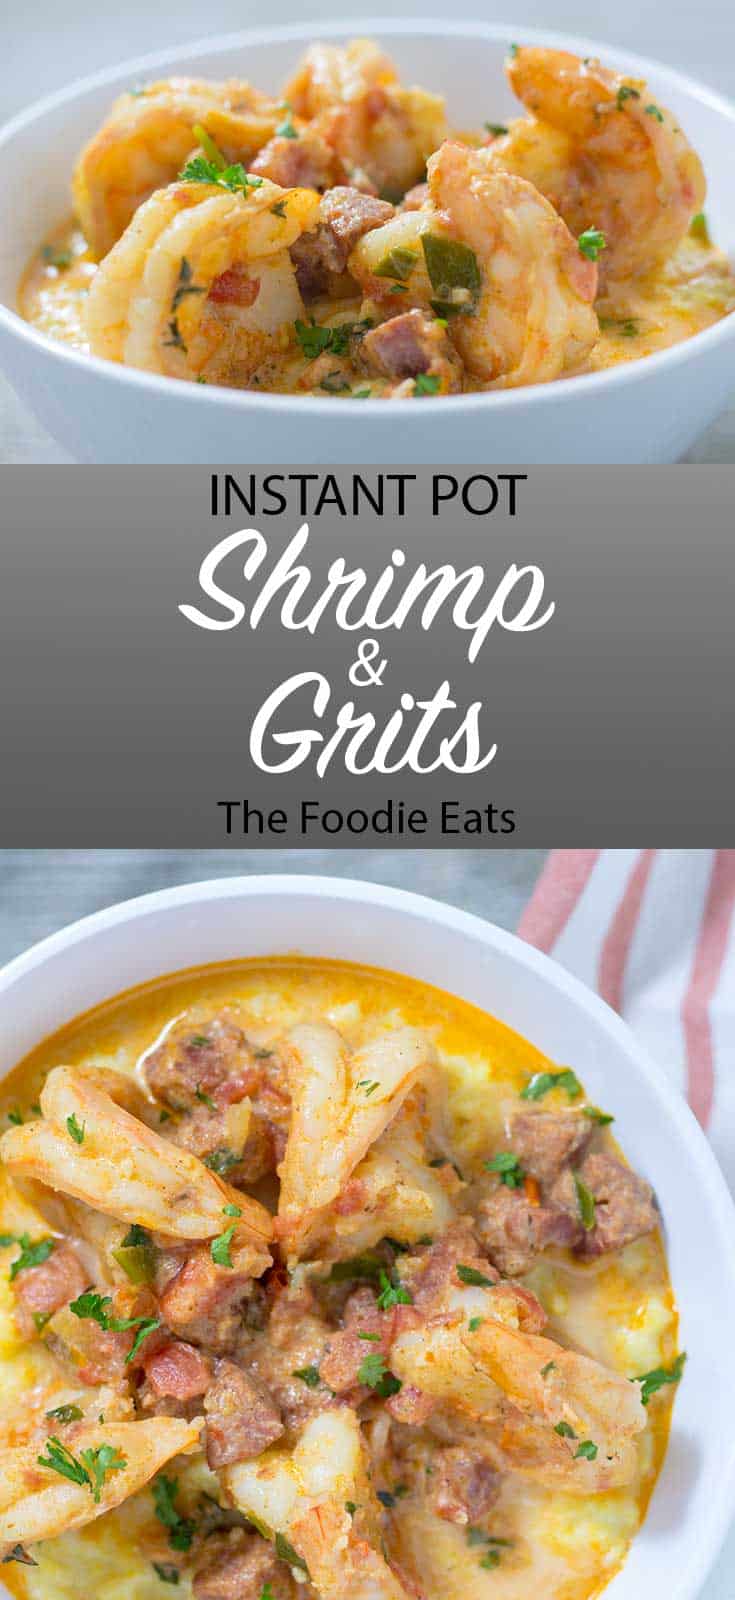 Instant Pot Shrimp and Grits - Cajun & Southern | The Foodie Eats